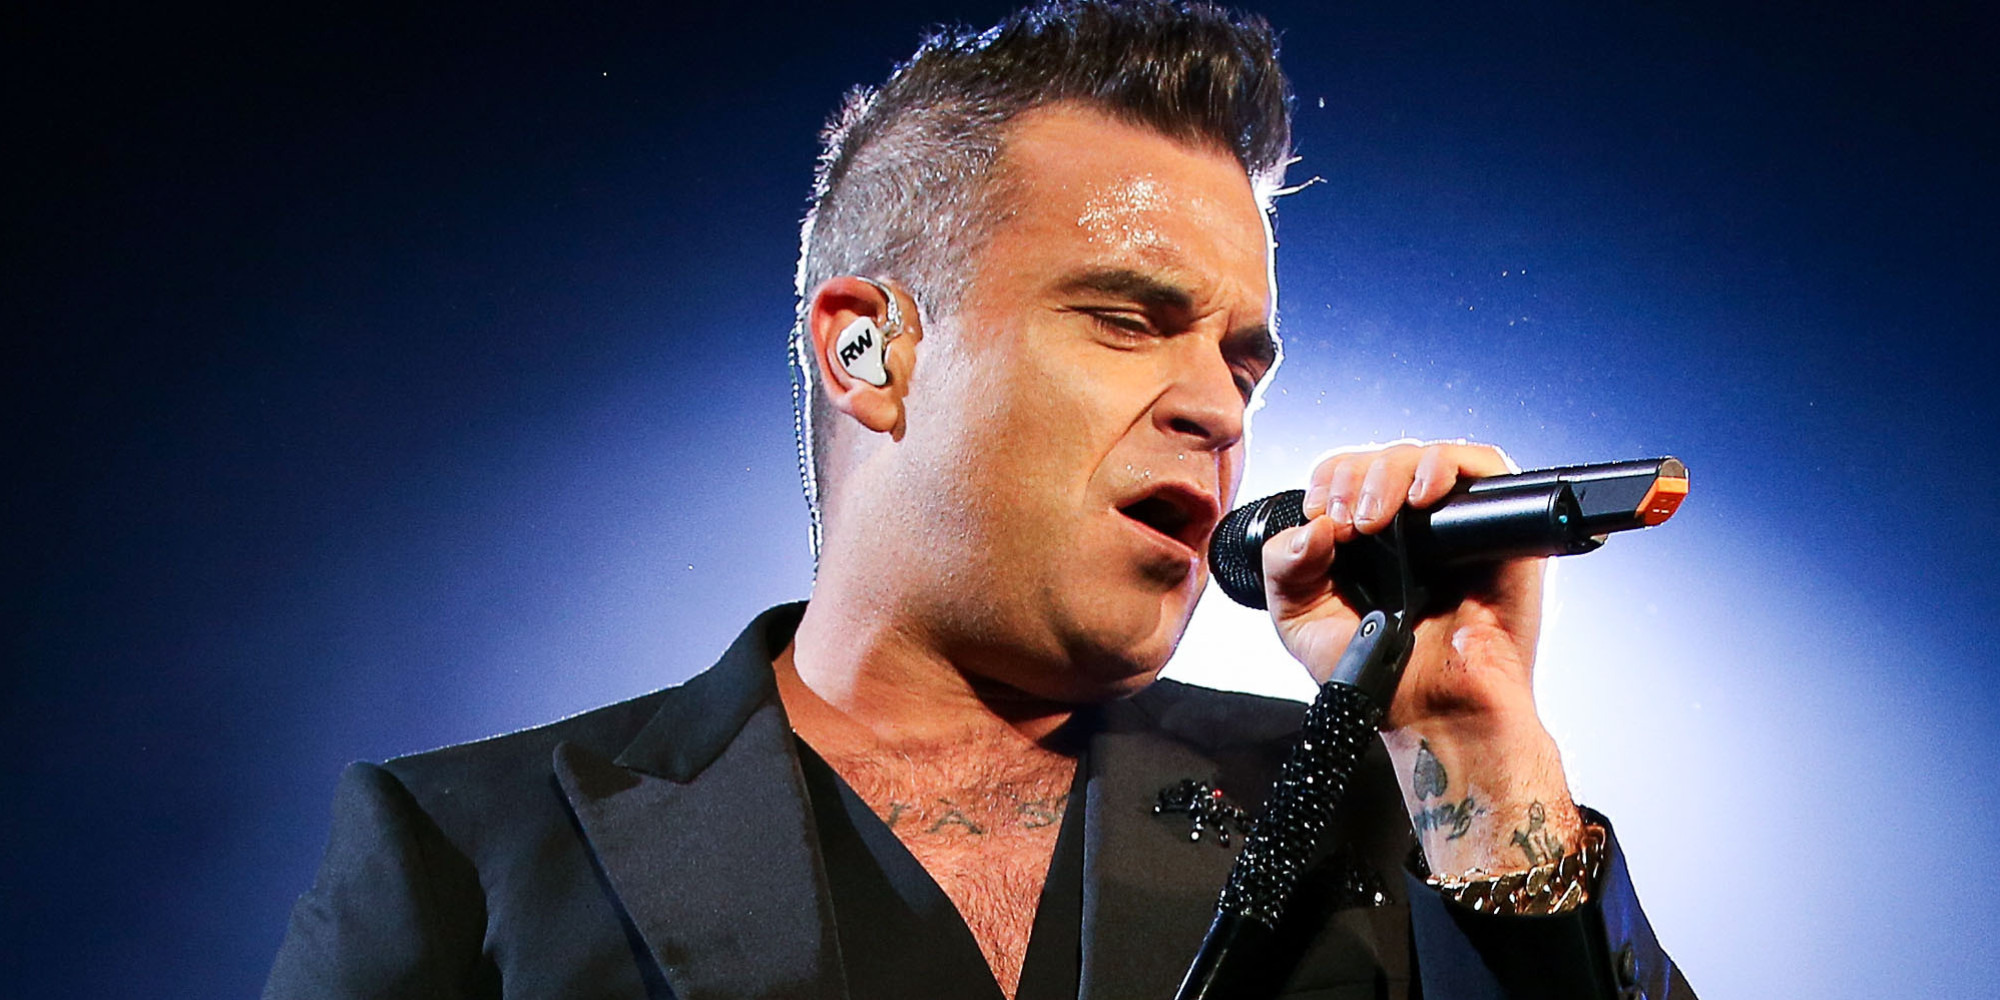 WELLINGTON, NEW ZEALAND - OCTOBER 31:  Robbie Williams performs live during his 'Let Me Entertain You' tour at Basin Reserve on October 31, 2015 in Wellington, New Zealand.  (Photo by Hagen Hopkins/Getty Images)